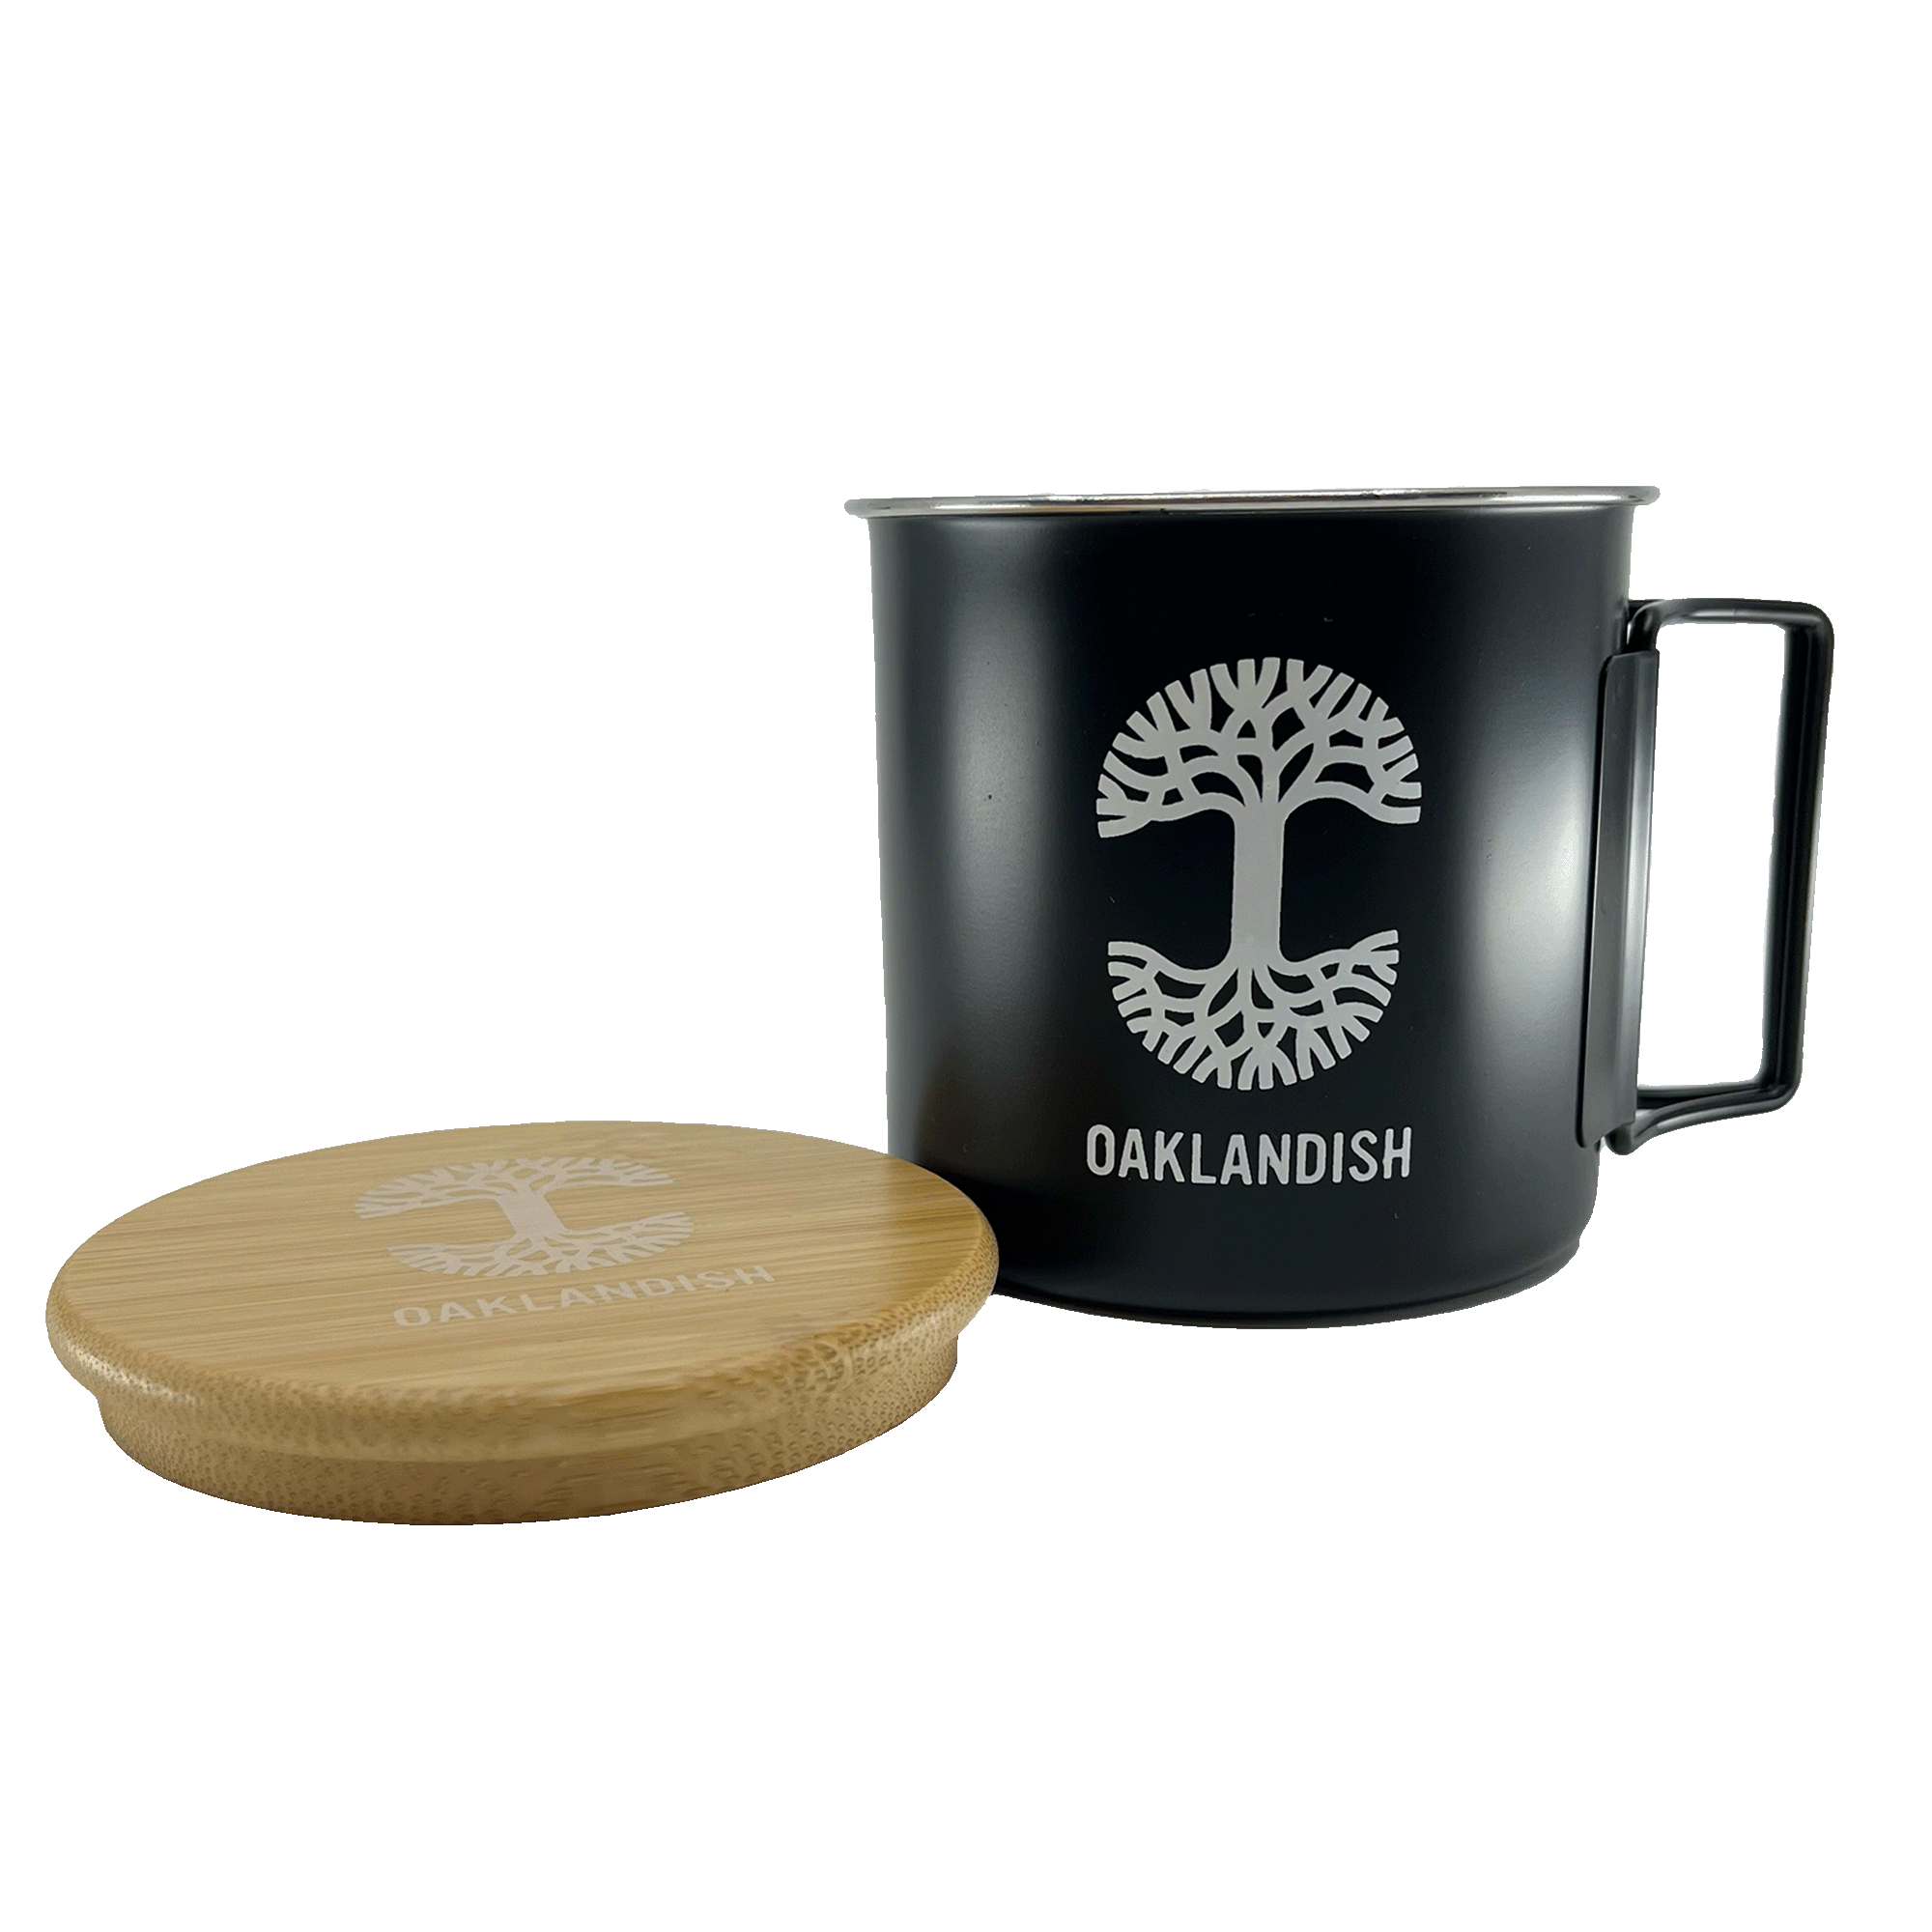 Black stainless steel camp mug with collapsable handle, large white Oaklandish tree logo, and wordmark and wood lid with Oaklandish logo beside.